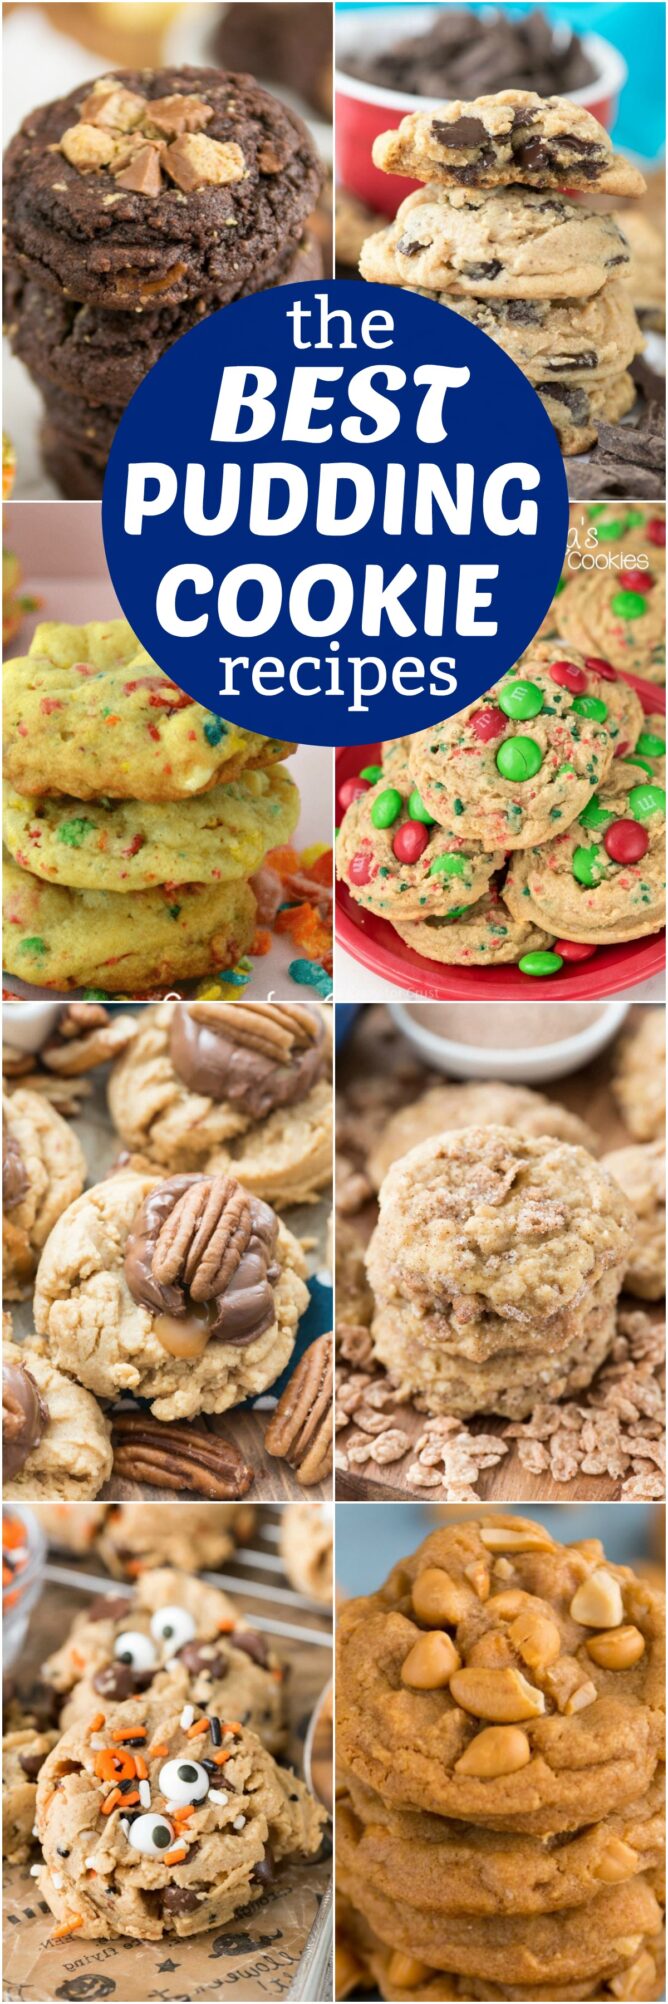 collage of the best pudding cookies - 8 photos